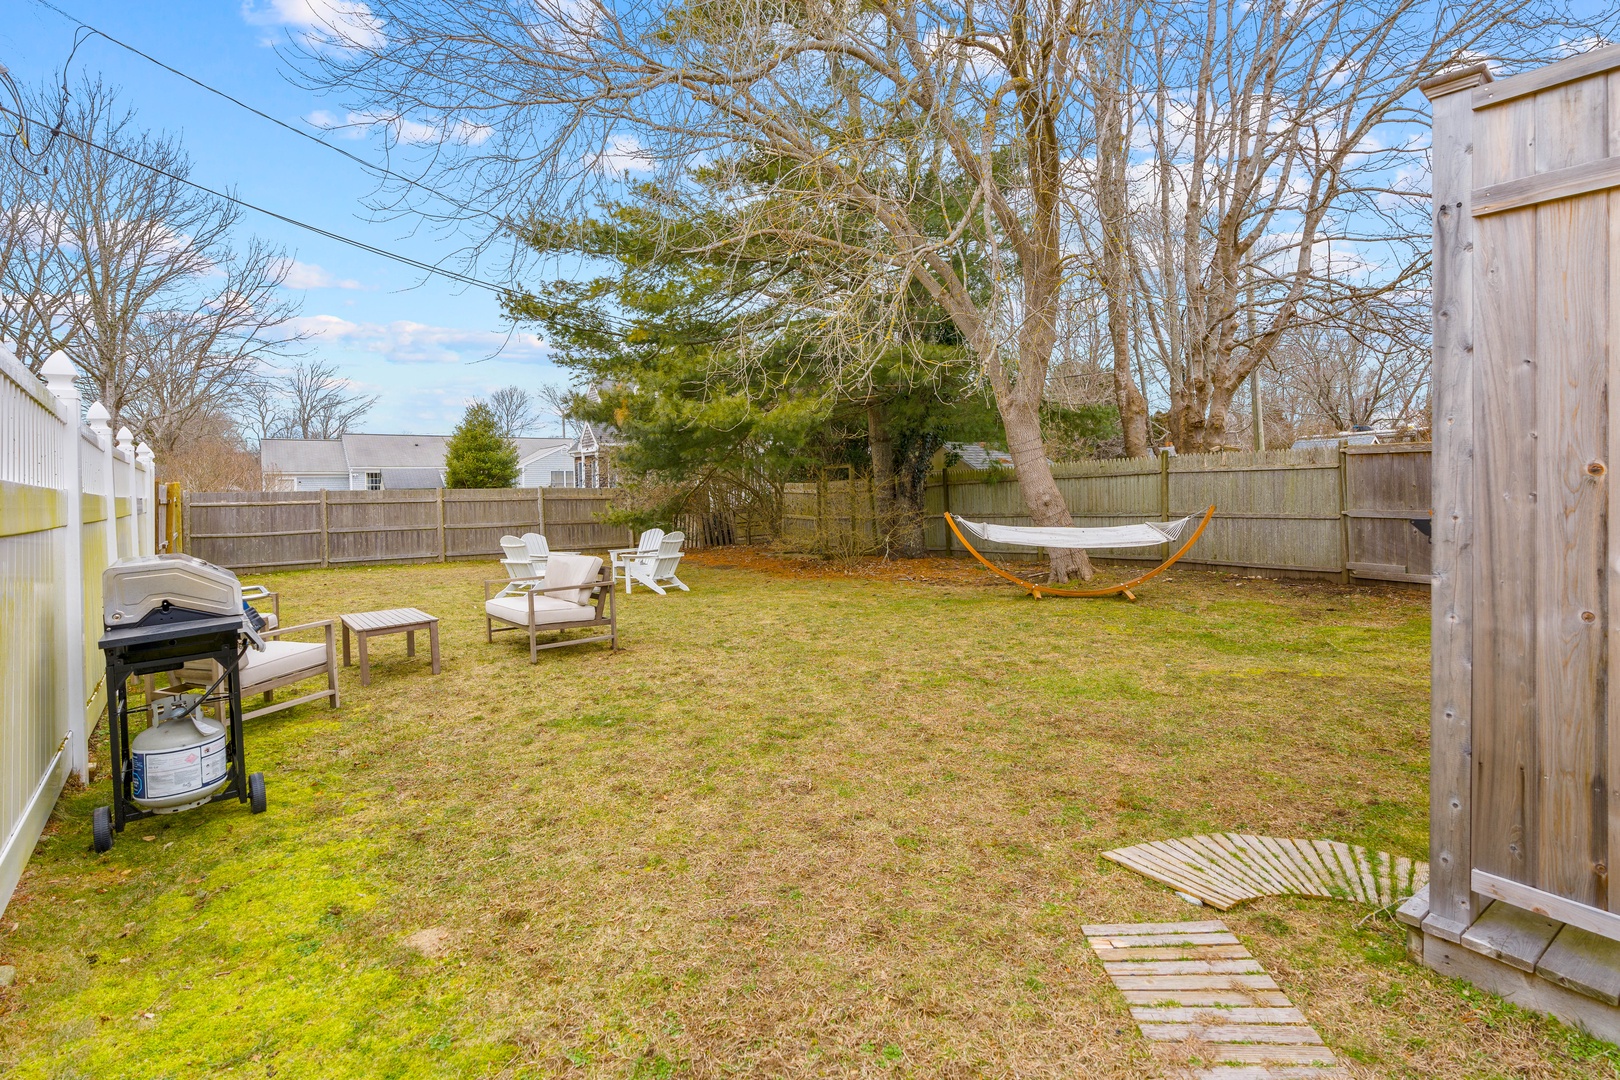 Relax and spend time together in the spacious backyard